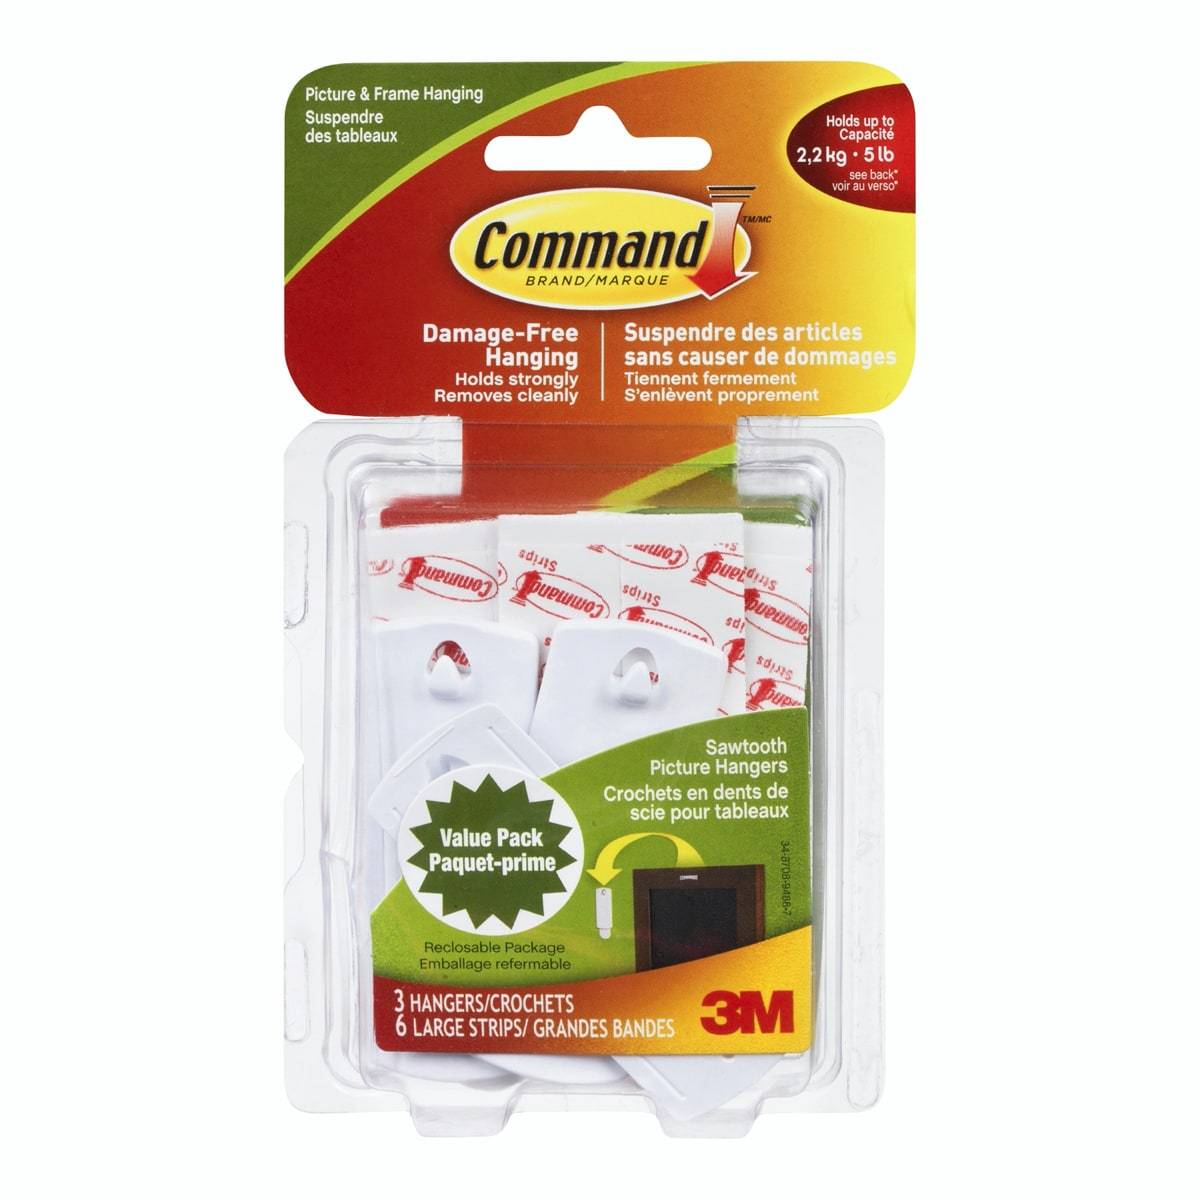 3M Command Sawtooth Picture Hanging Hooks Value Pack 3 Hangers, 6 Large Strips